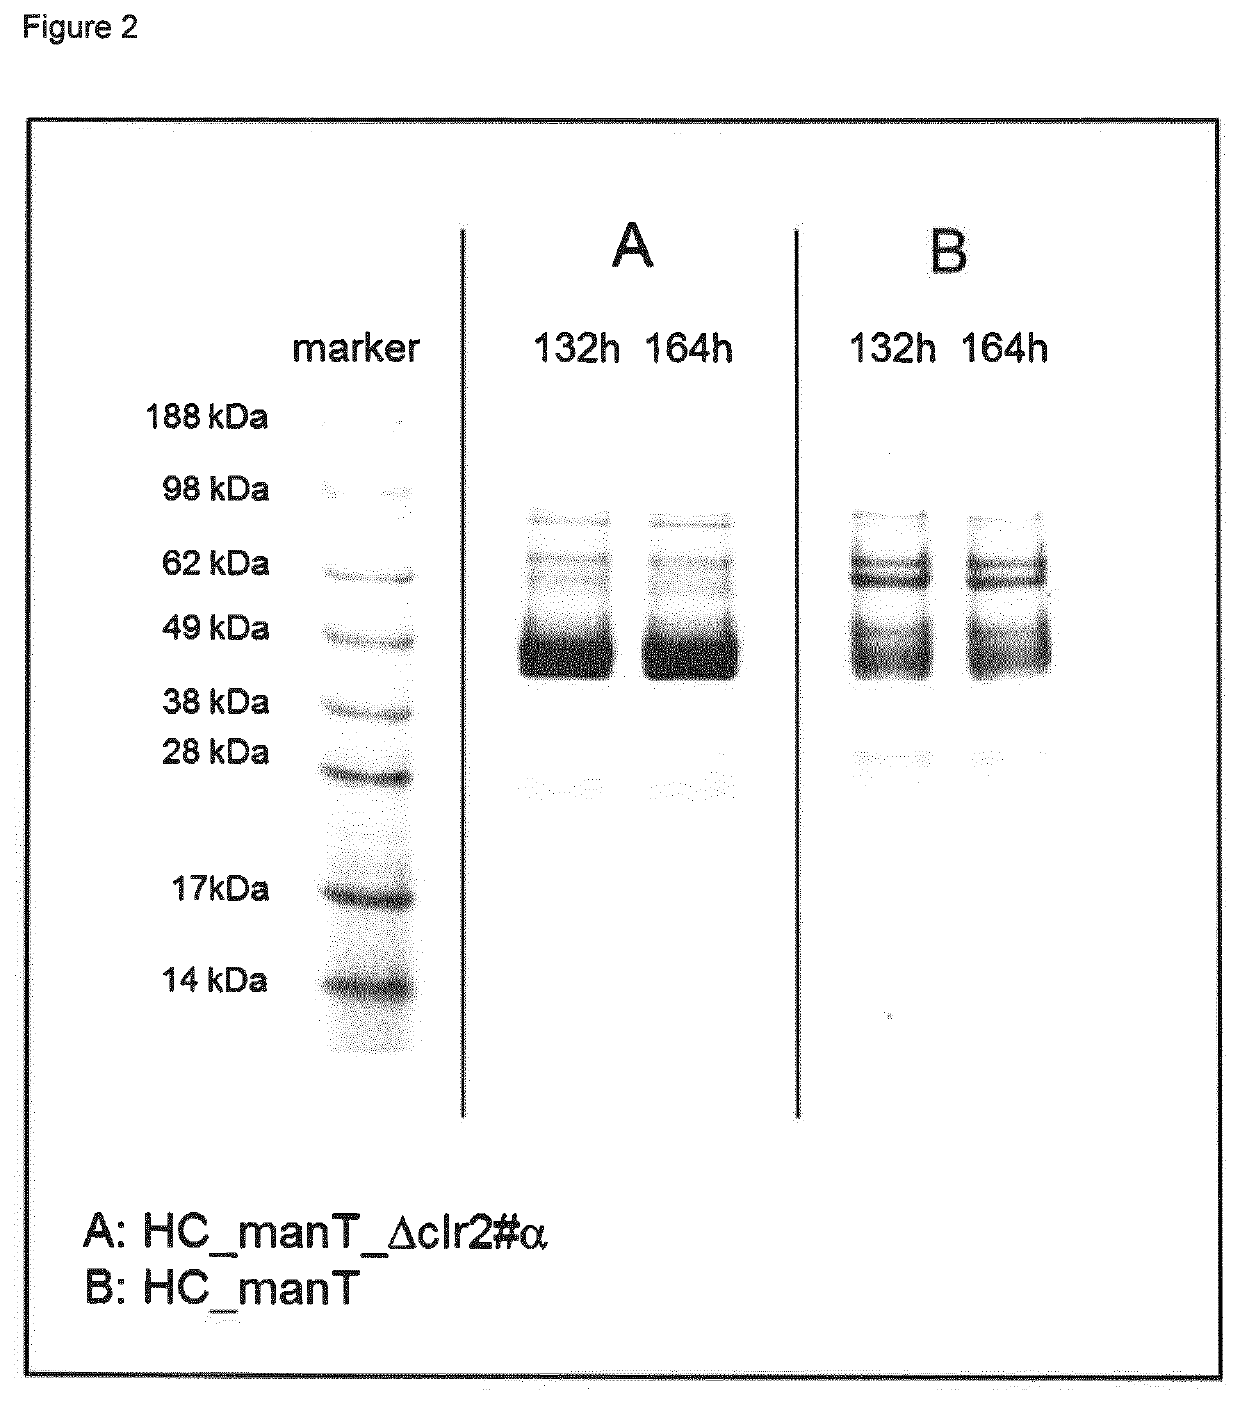 Method of producing proteins in filamentous fungi with decreased clr2 activity